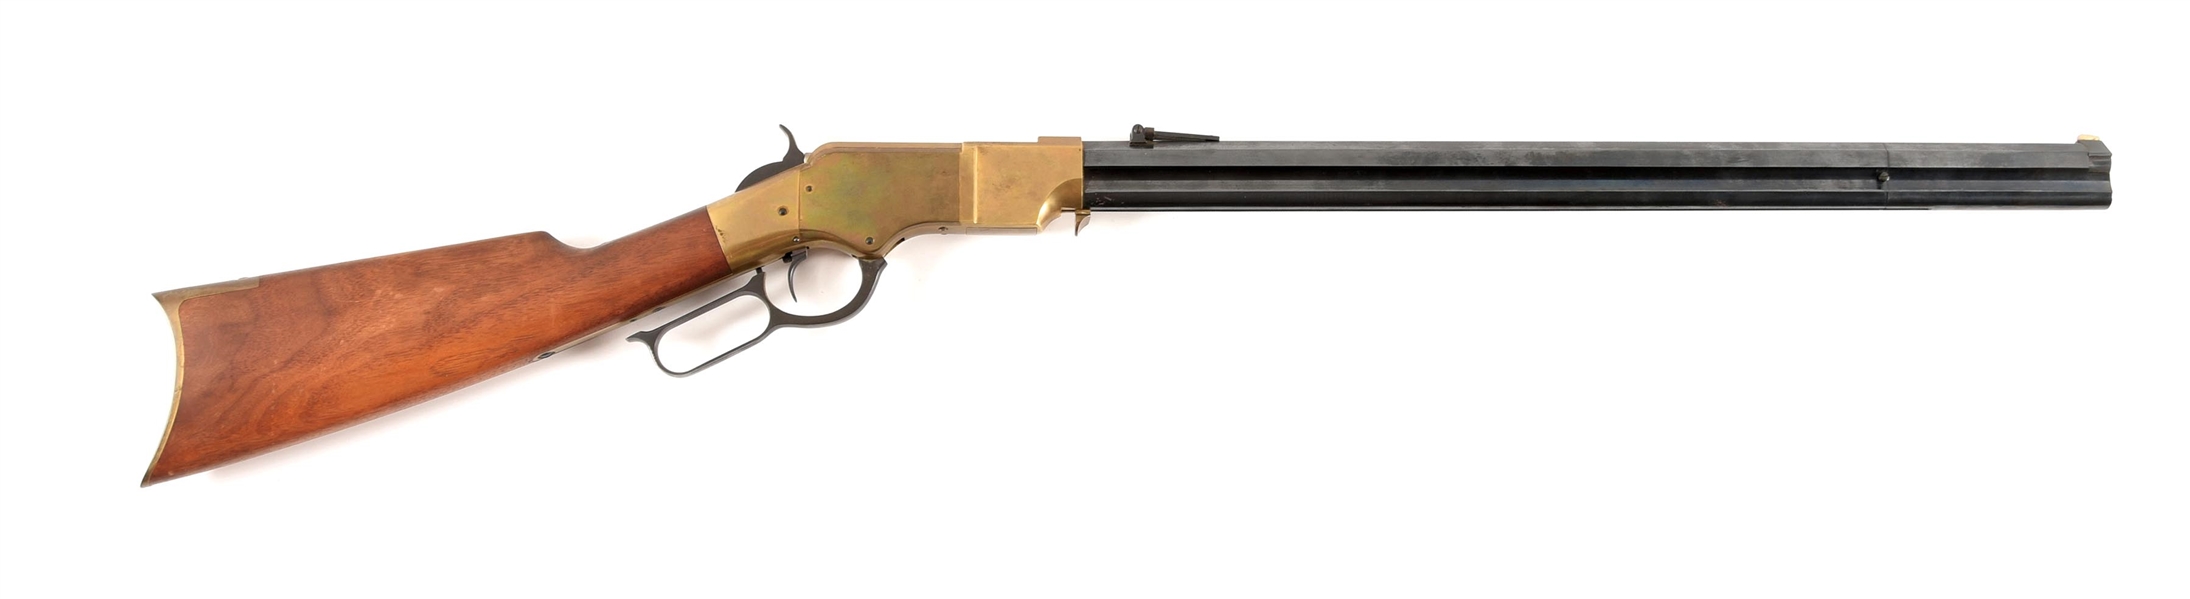 (M) NAVY ARMS HENRY MODEL 1860 LEVER ACTION RIFLE.